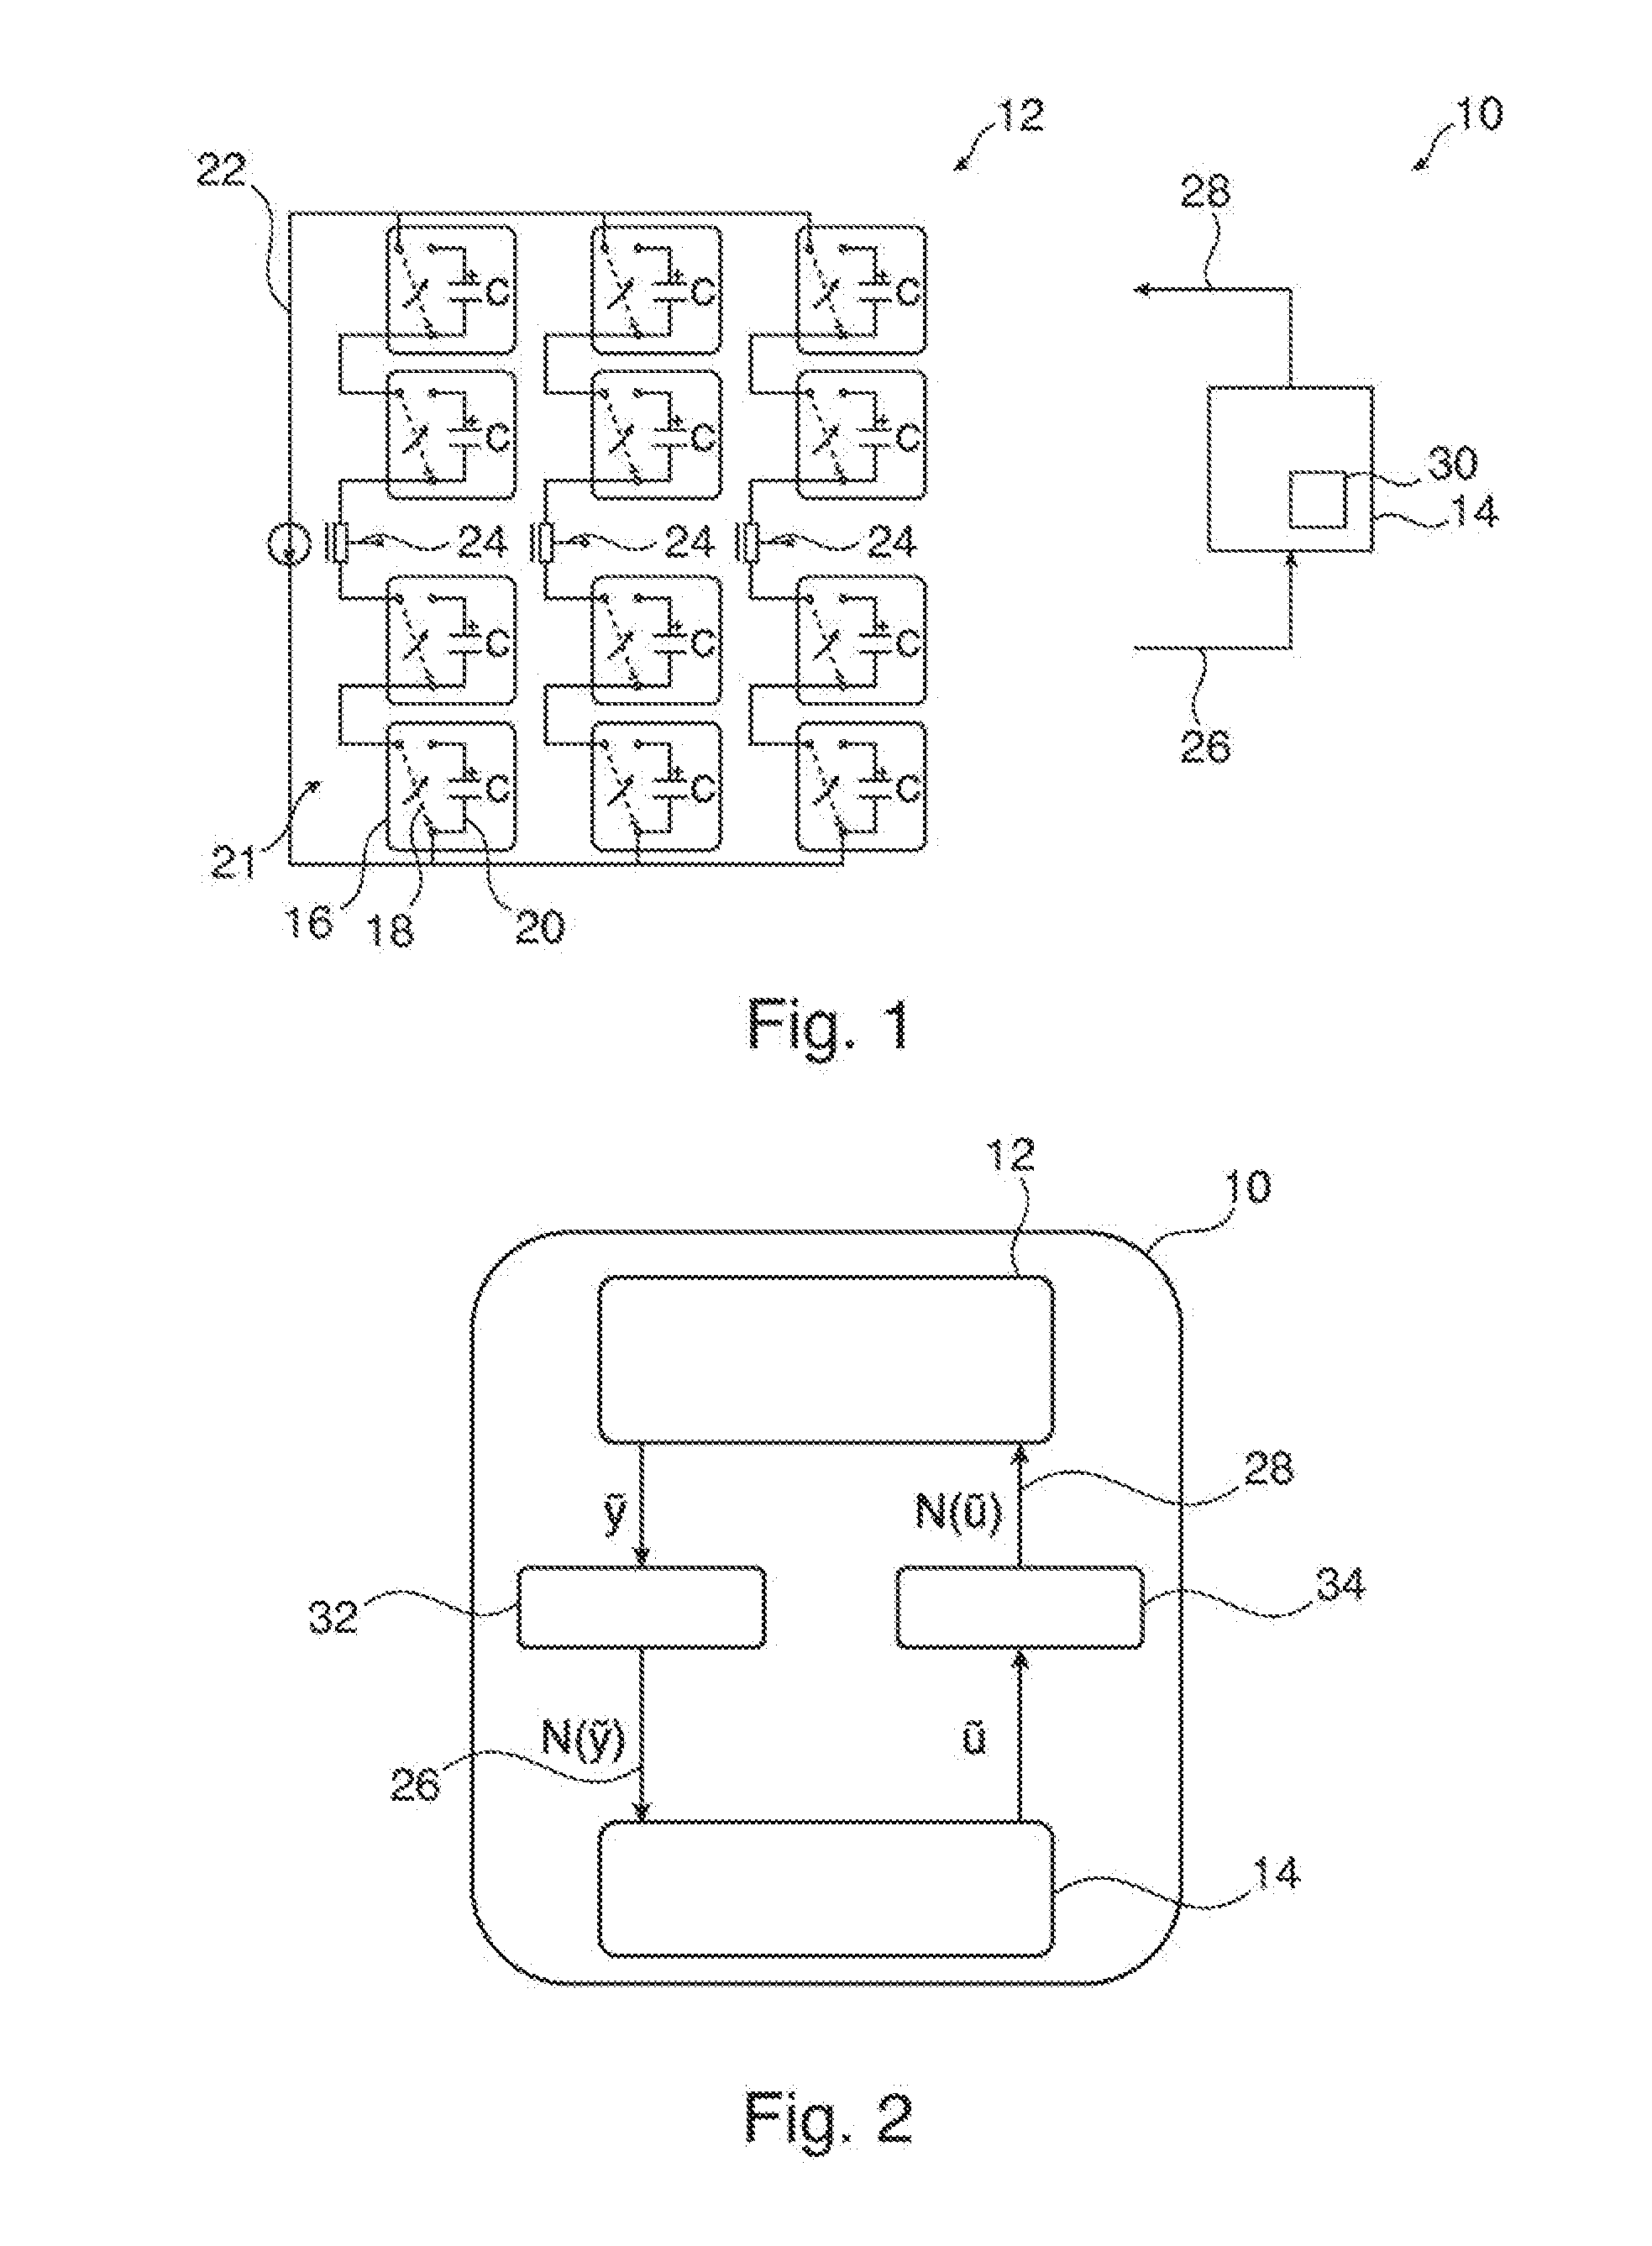 Networked control of a modular multi-level converter